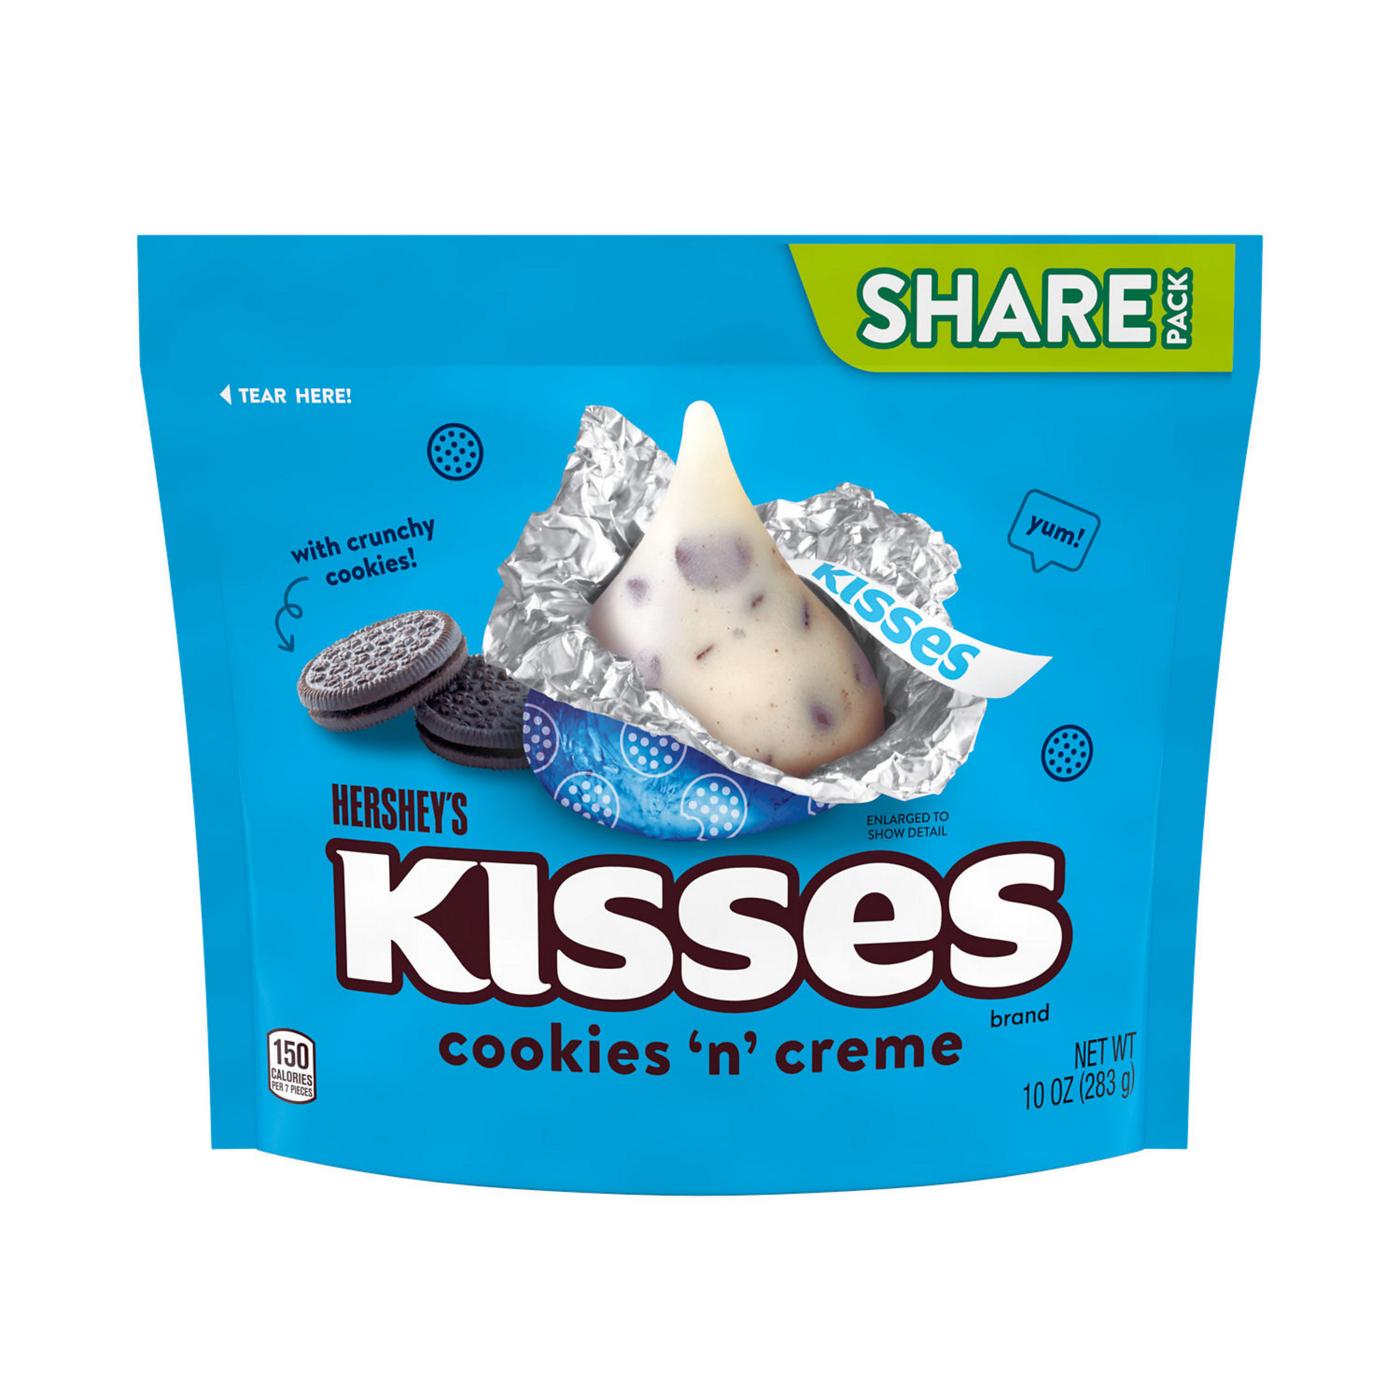 Hershey's Kisses Cookies 'n' Creme Candy - Share Pack; image 1 of 5